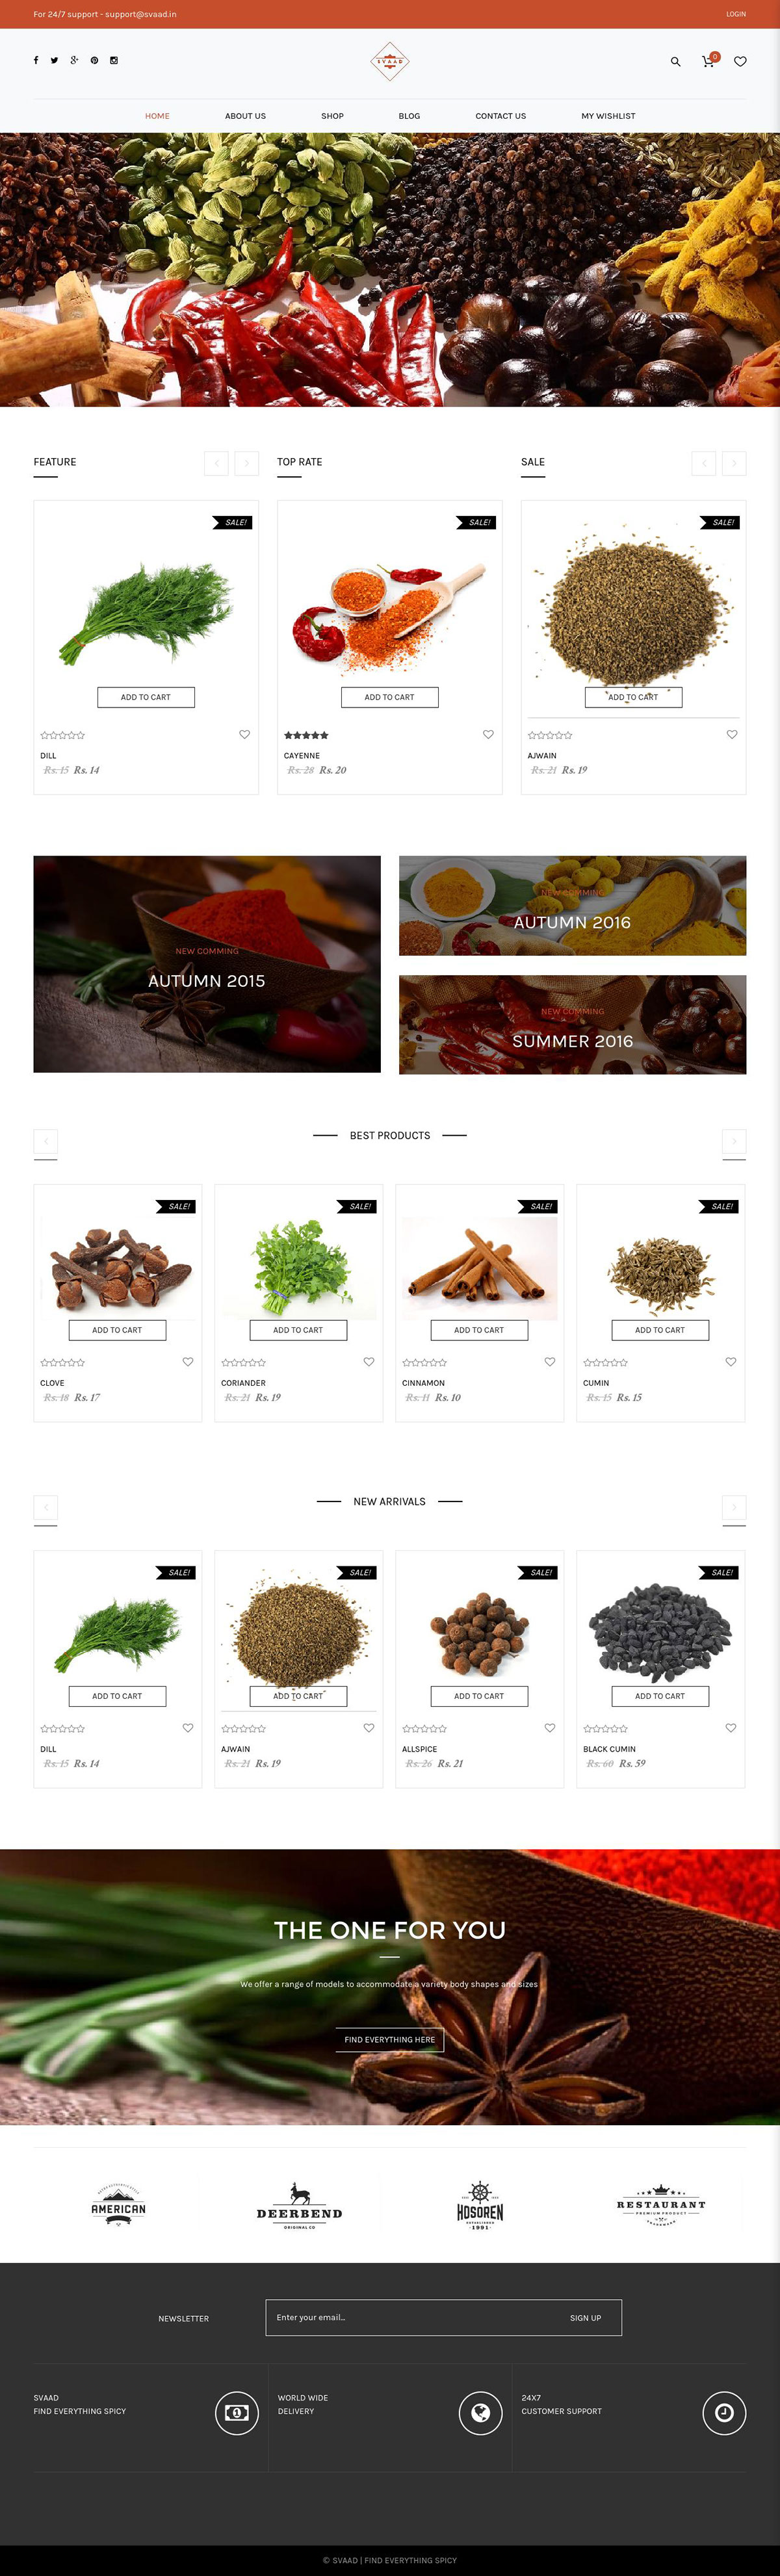 Ecommerce spice ecommerce spice mobile app spices